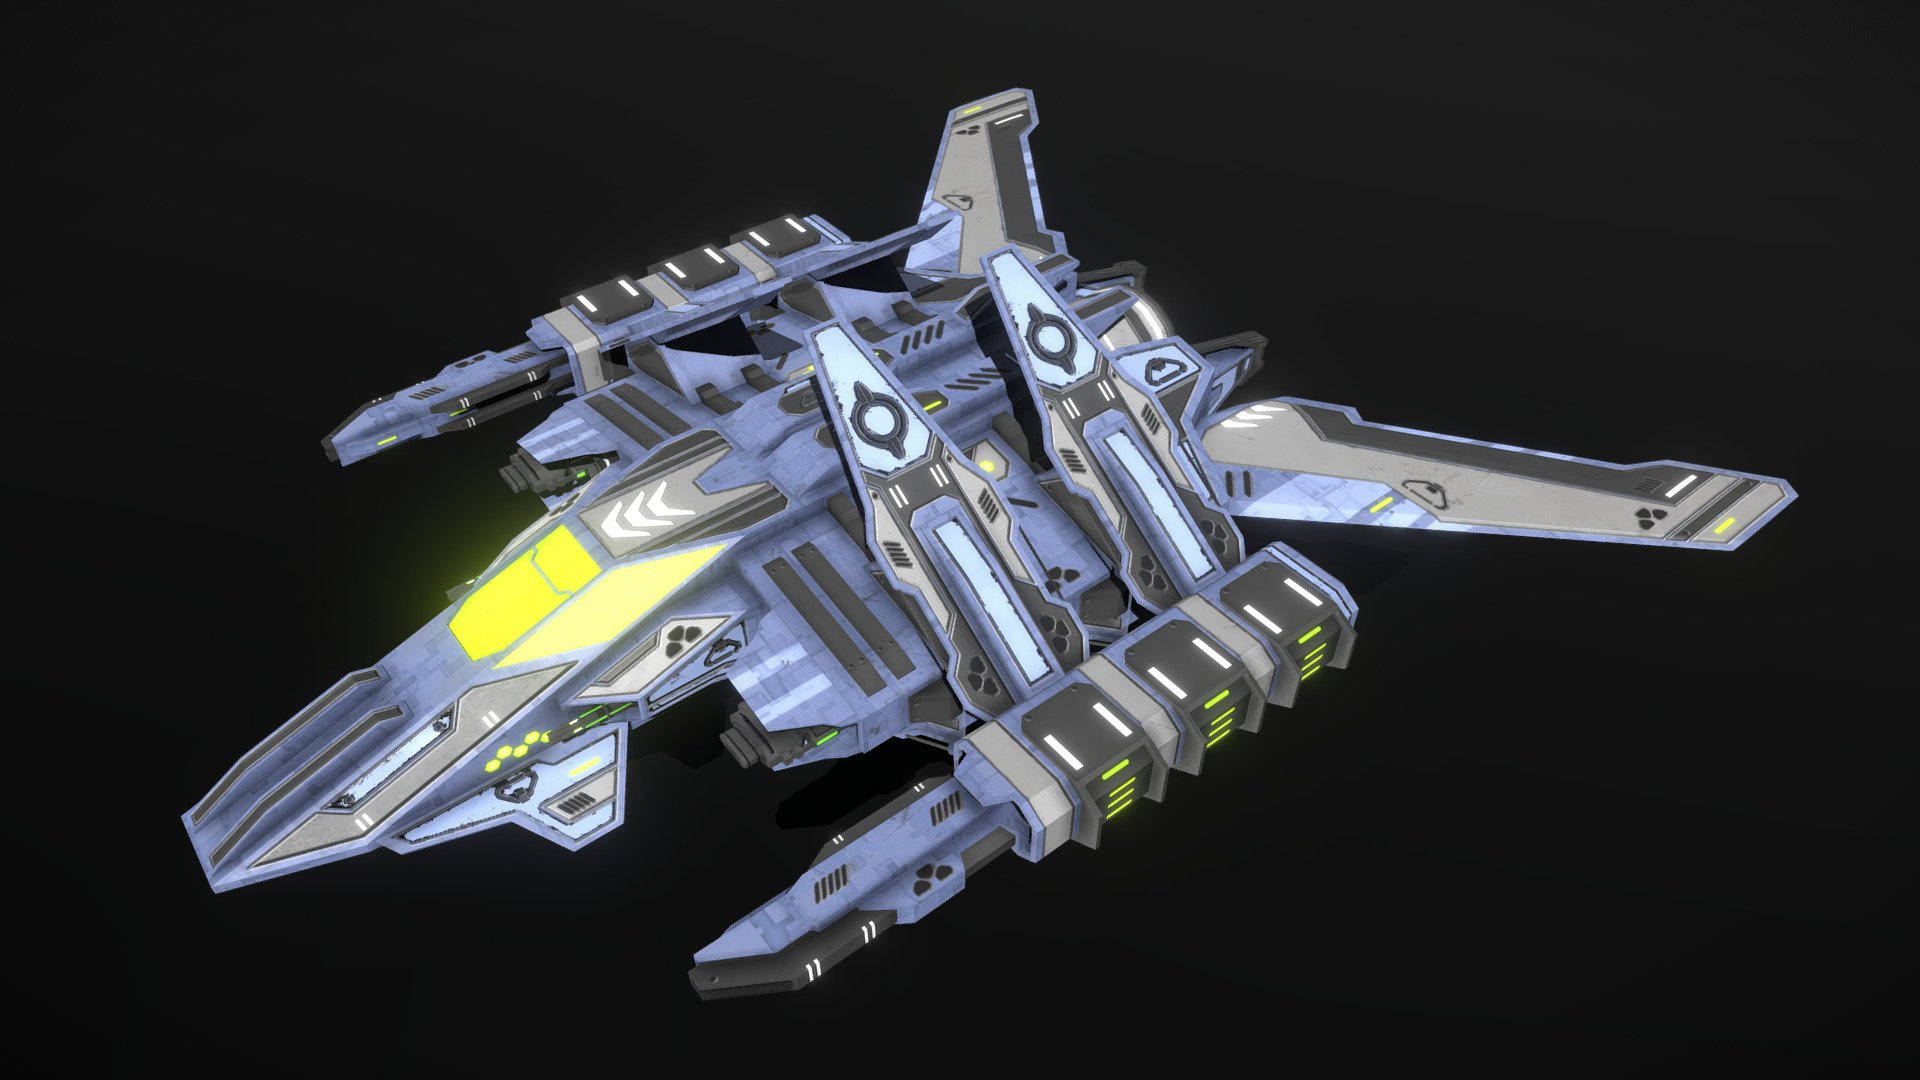 This is a model of a low-poly and game-ready scifi spaceship. 

The weapons are separate meshes and can be animated with a keyframe animation tool. The weapon loadout can be changed too. 

The model comes with several differently colored texture sets. The PSD file with intact layers is included.

If you have purchased this model please make sure to download the “additional file”.  It contains FBX and OBJ meshes, full resolution textures and the source PSDs with intact layers. The meshes are separate and can be animated (e.g. firing animations for gun barrels, rotating turrets, etc) 3d model